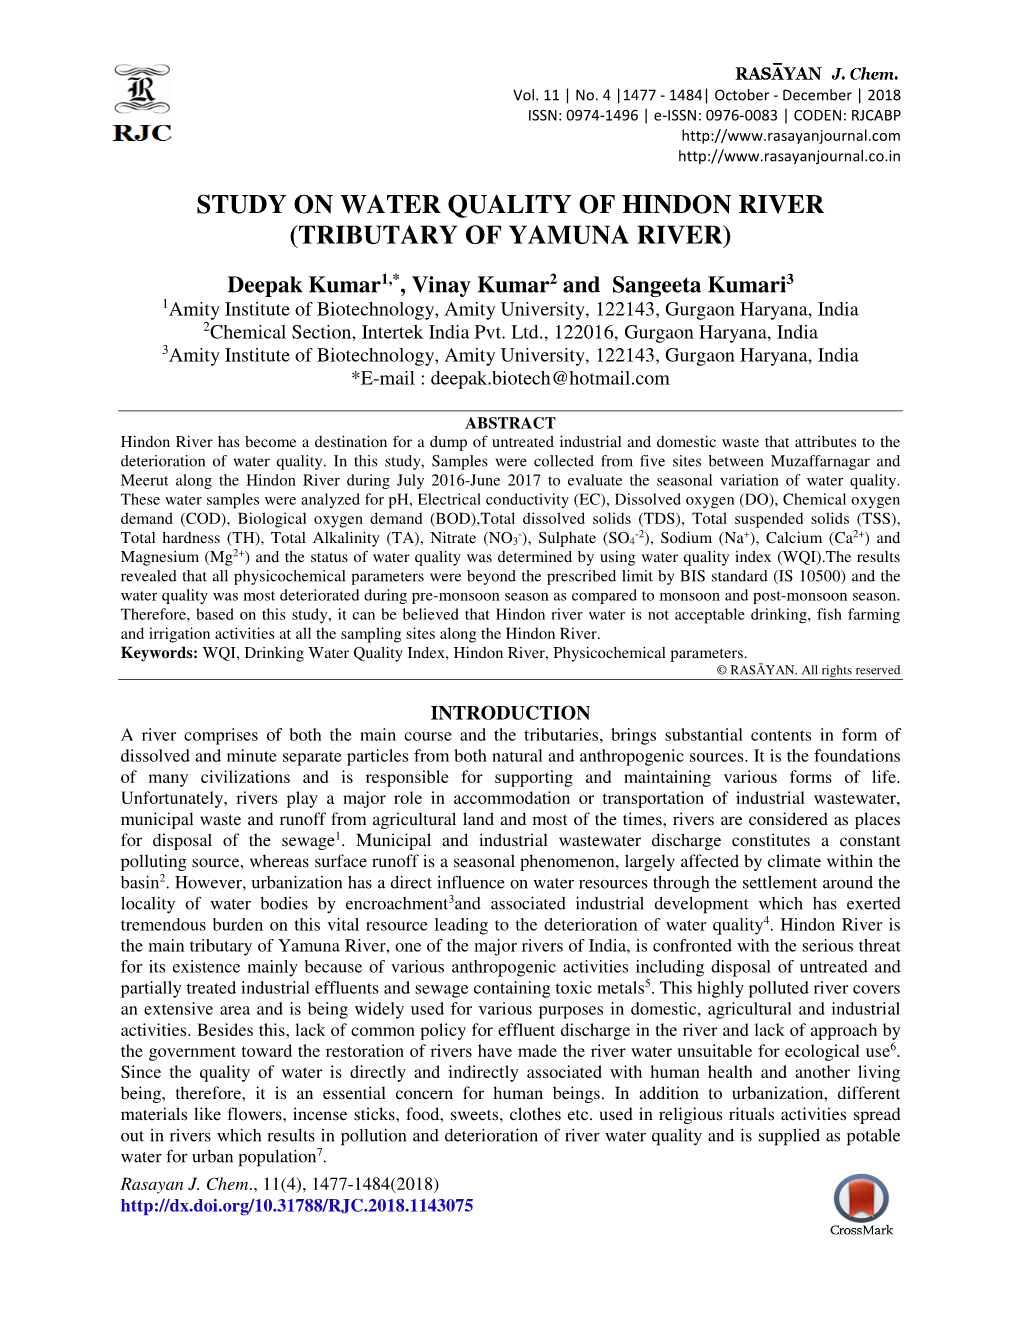 Study on Water Quality of Hindon River (Tributary of Yamuna River)